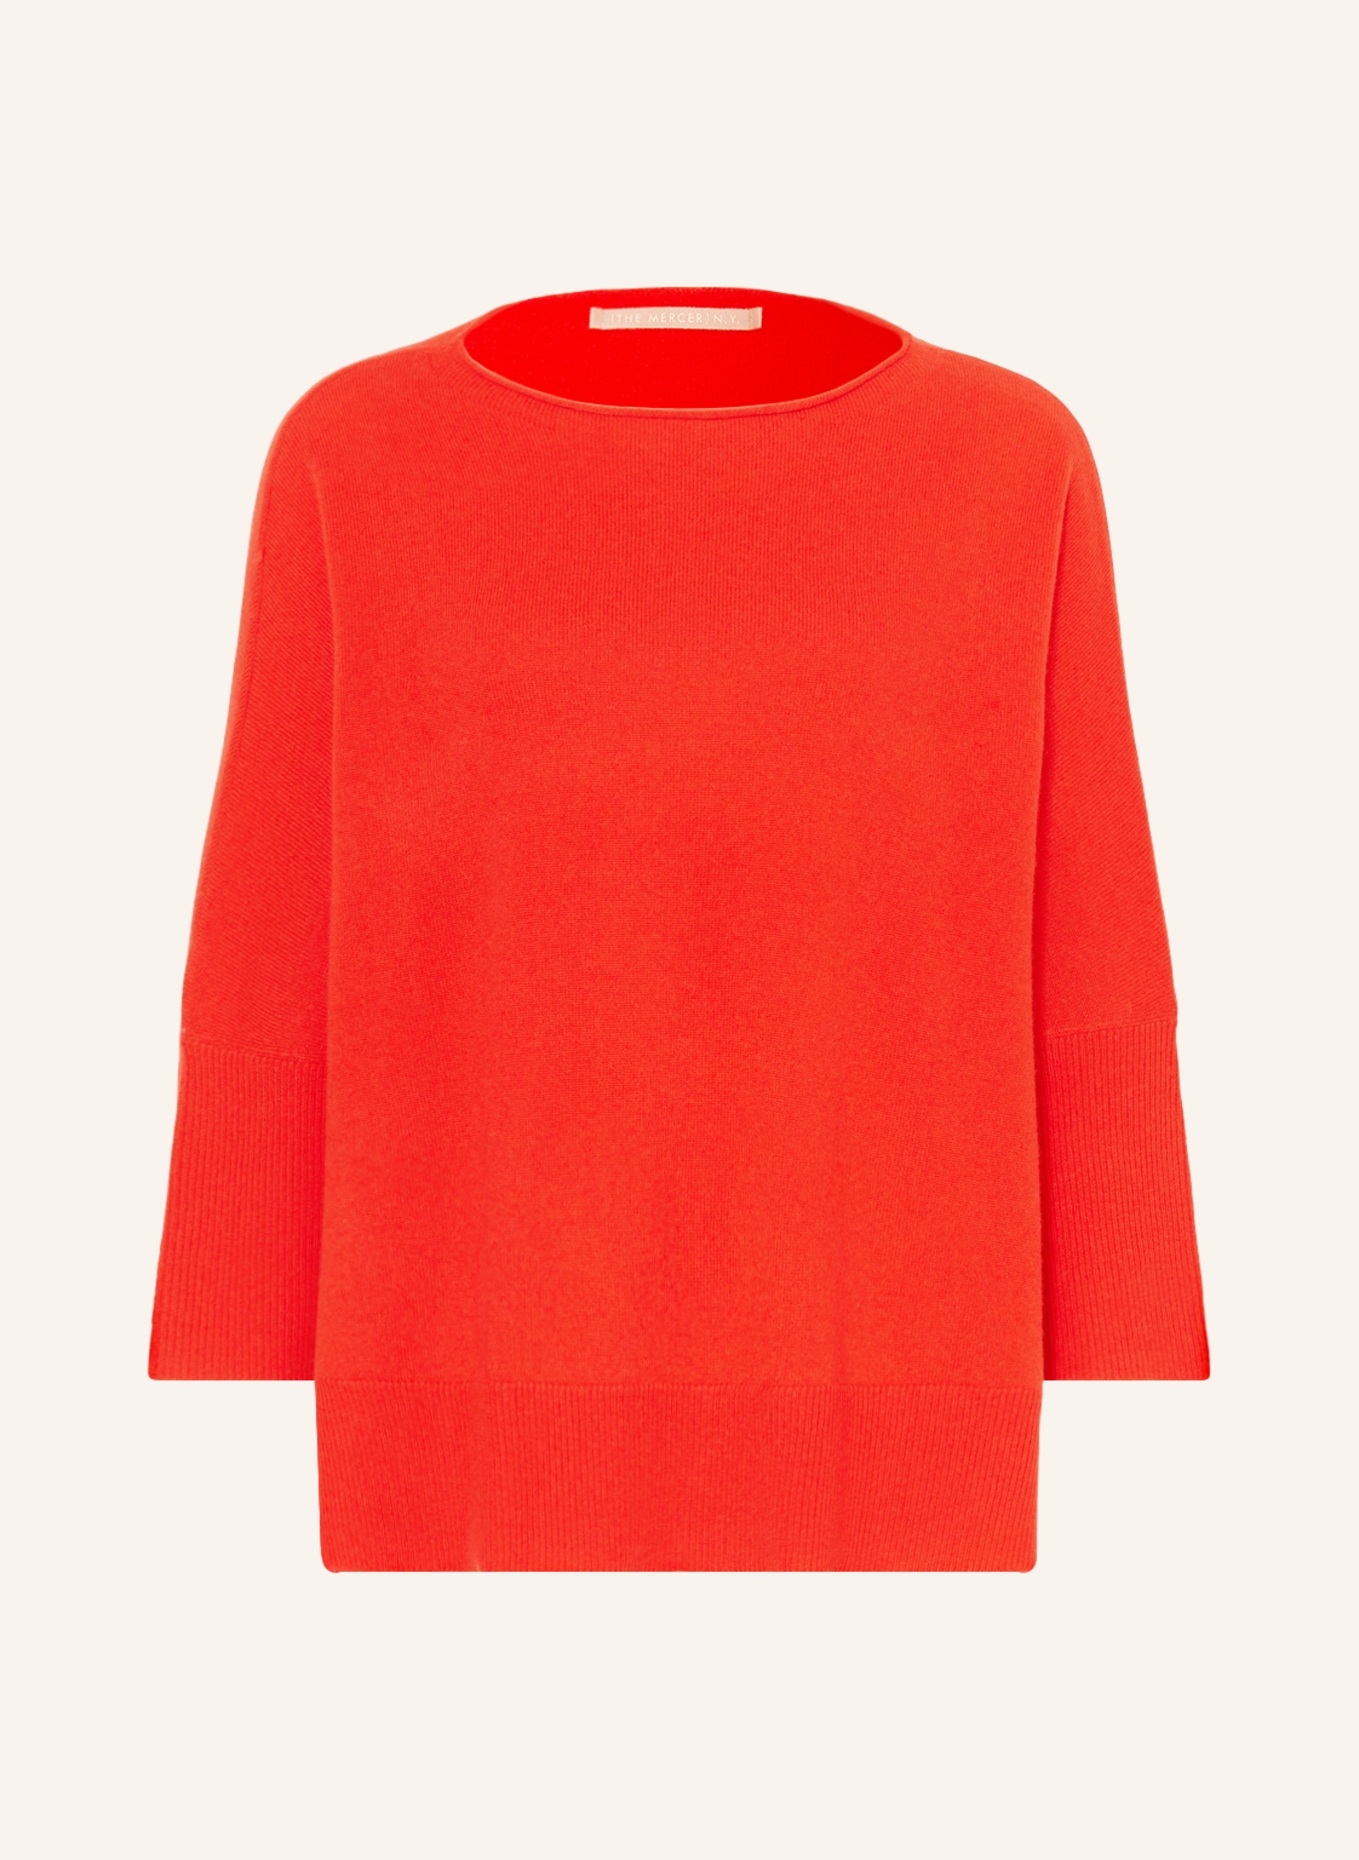 (THE MERCER) N.Y. Oversized sweater made of cashmere , Color: RED (Image 1)